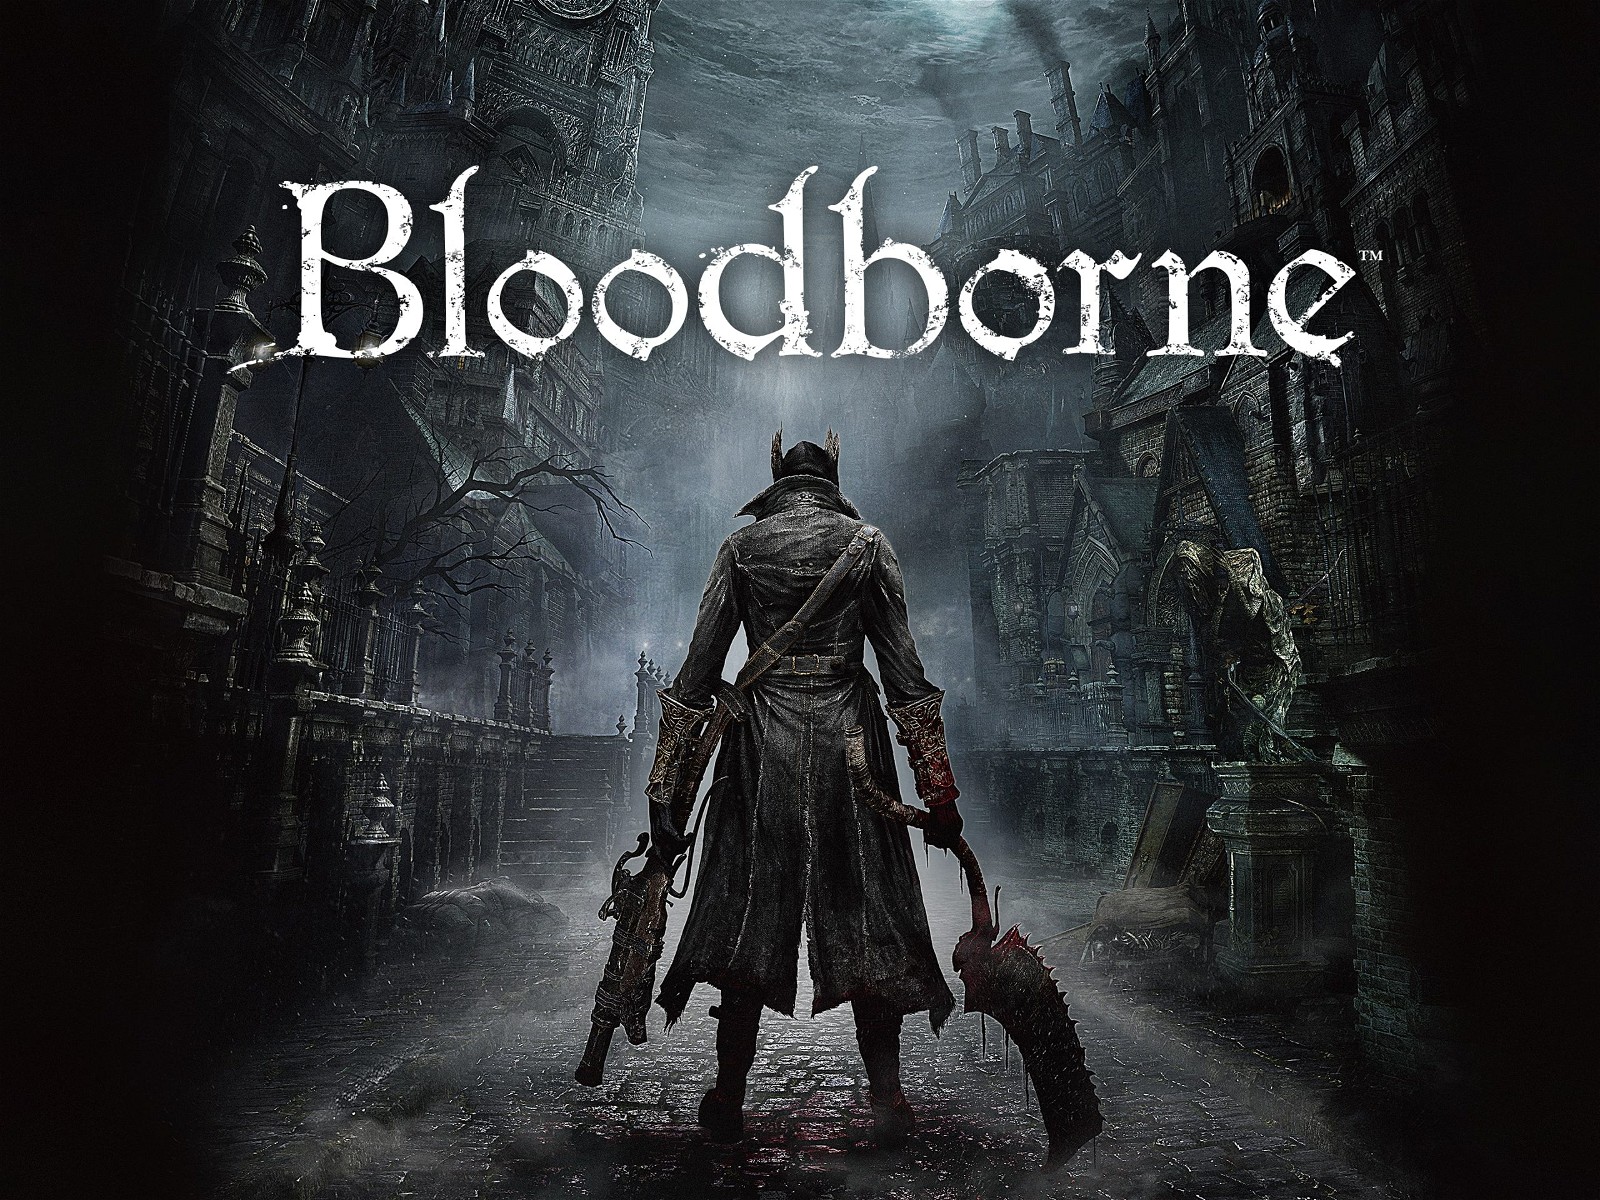 Bloodborne tags along Nvidia's RTX remix hype in hopes of getting a PC port release soon